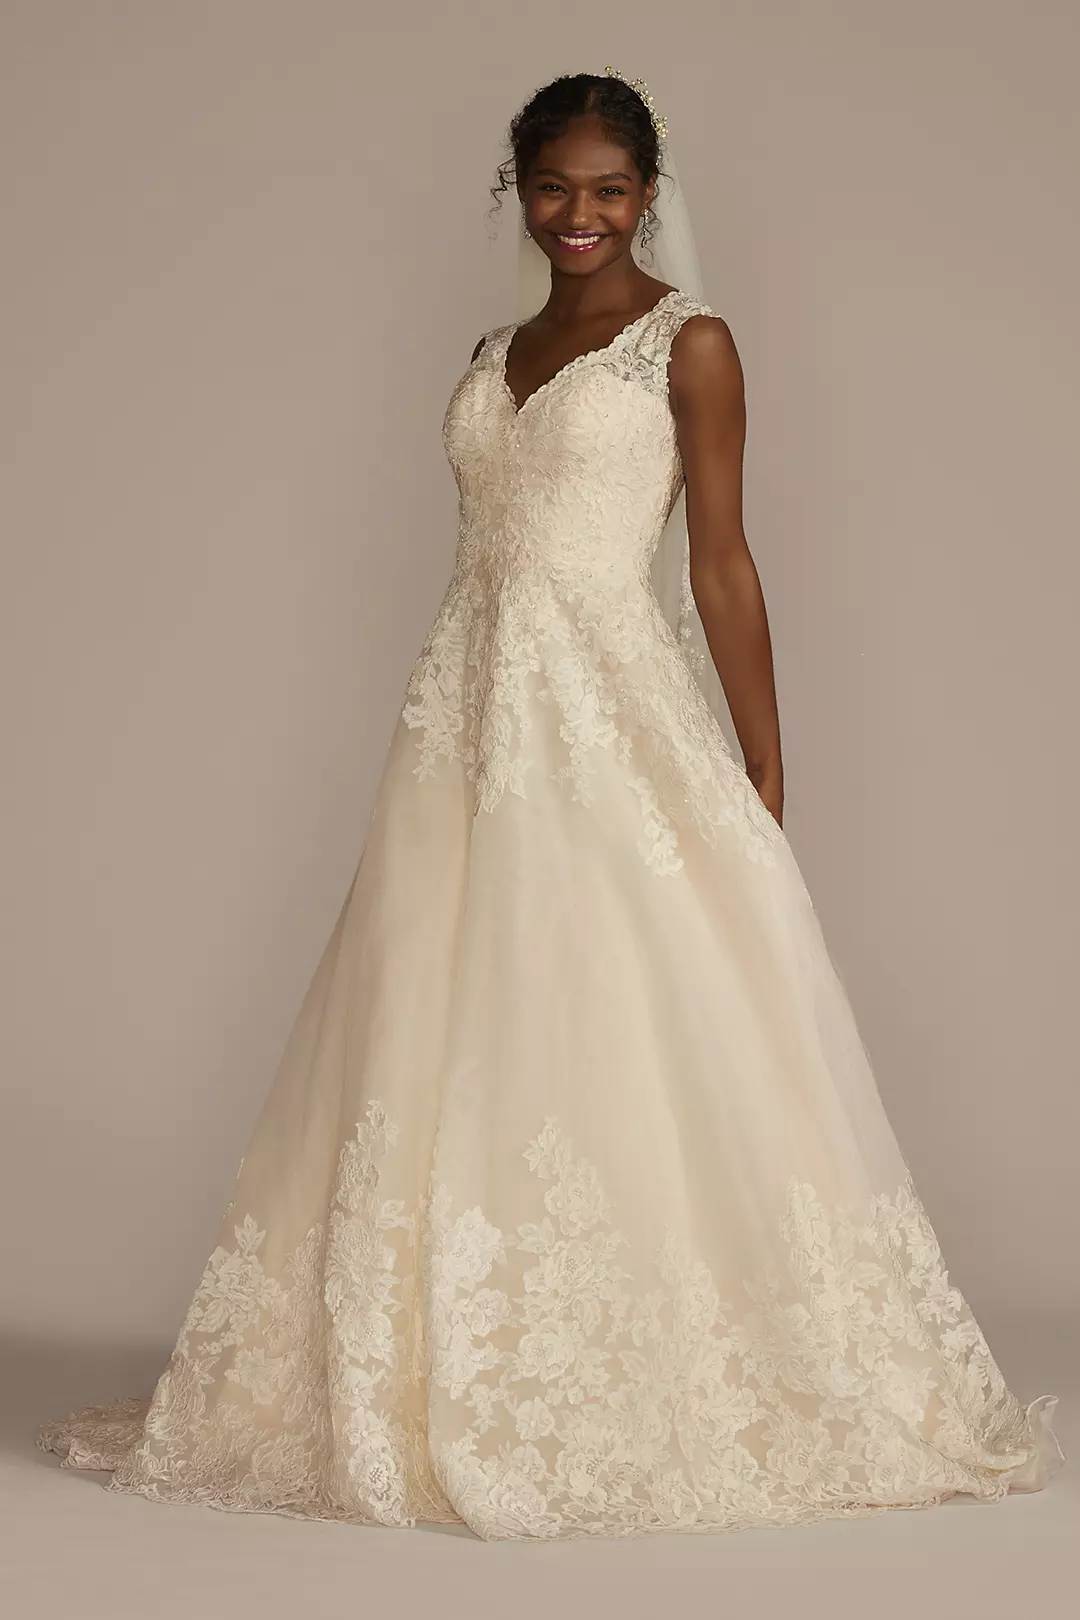 David's Bridal Scalloped Lace and Tulle Wedding Dress 7WG3850 8p Ivory/Champagne Petite - Ivory/Champagne, 8p